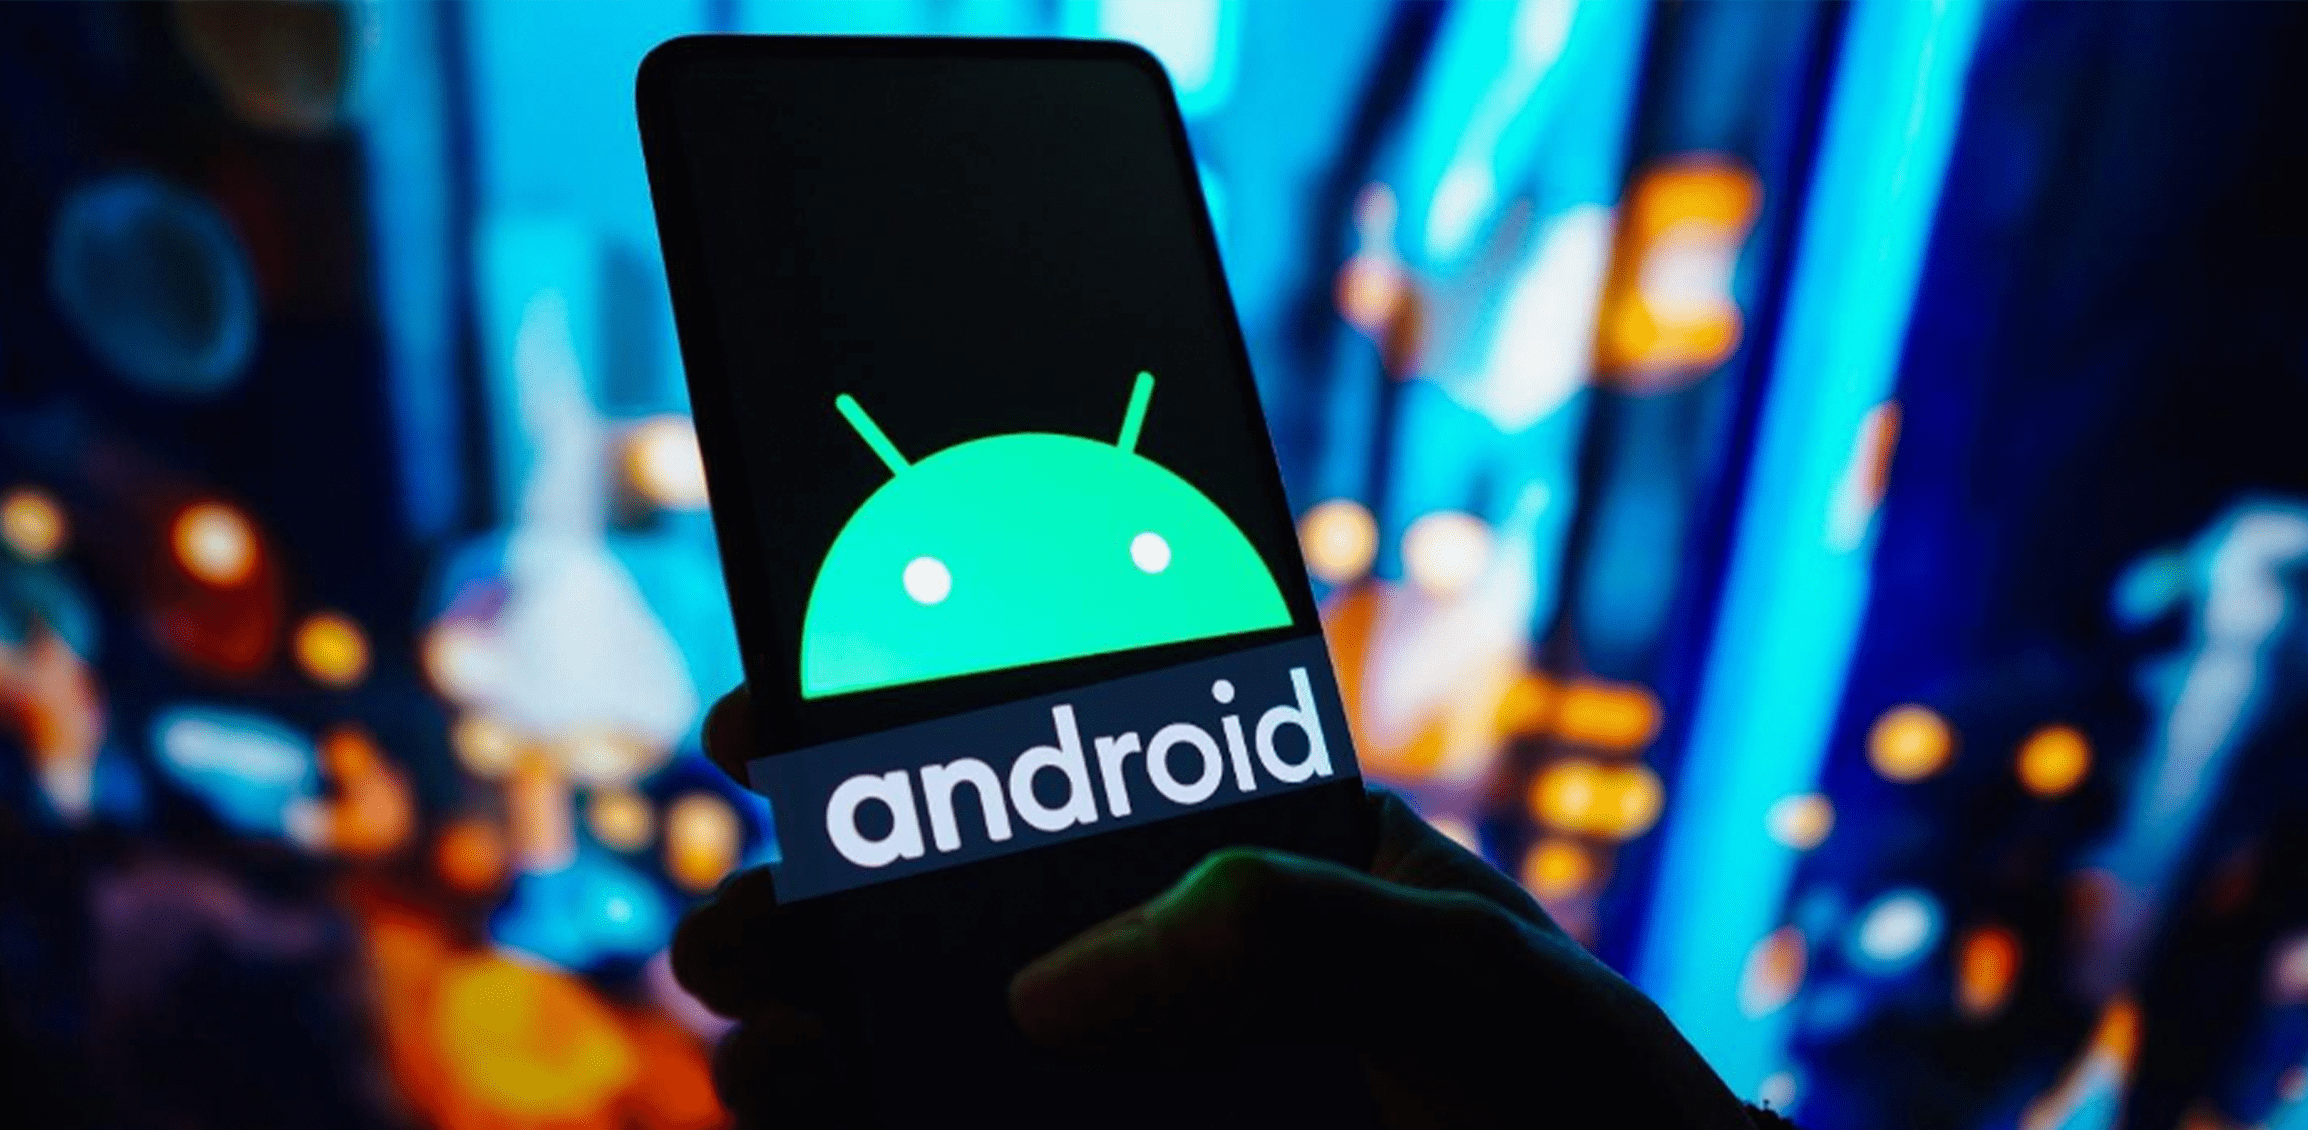 How to Hack an Android Phone